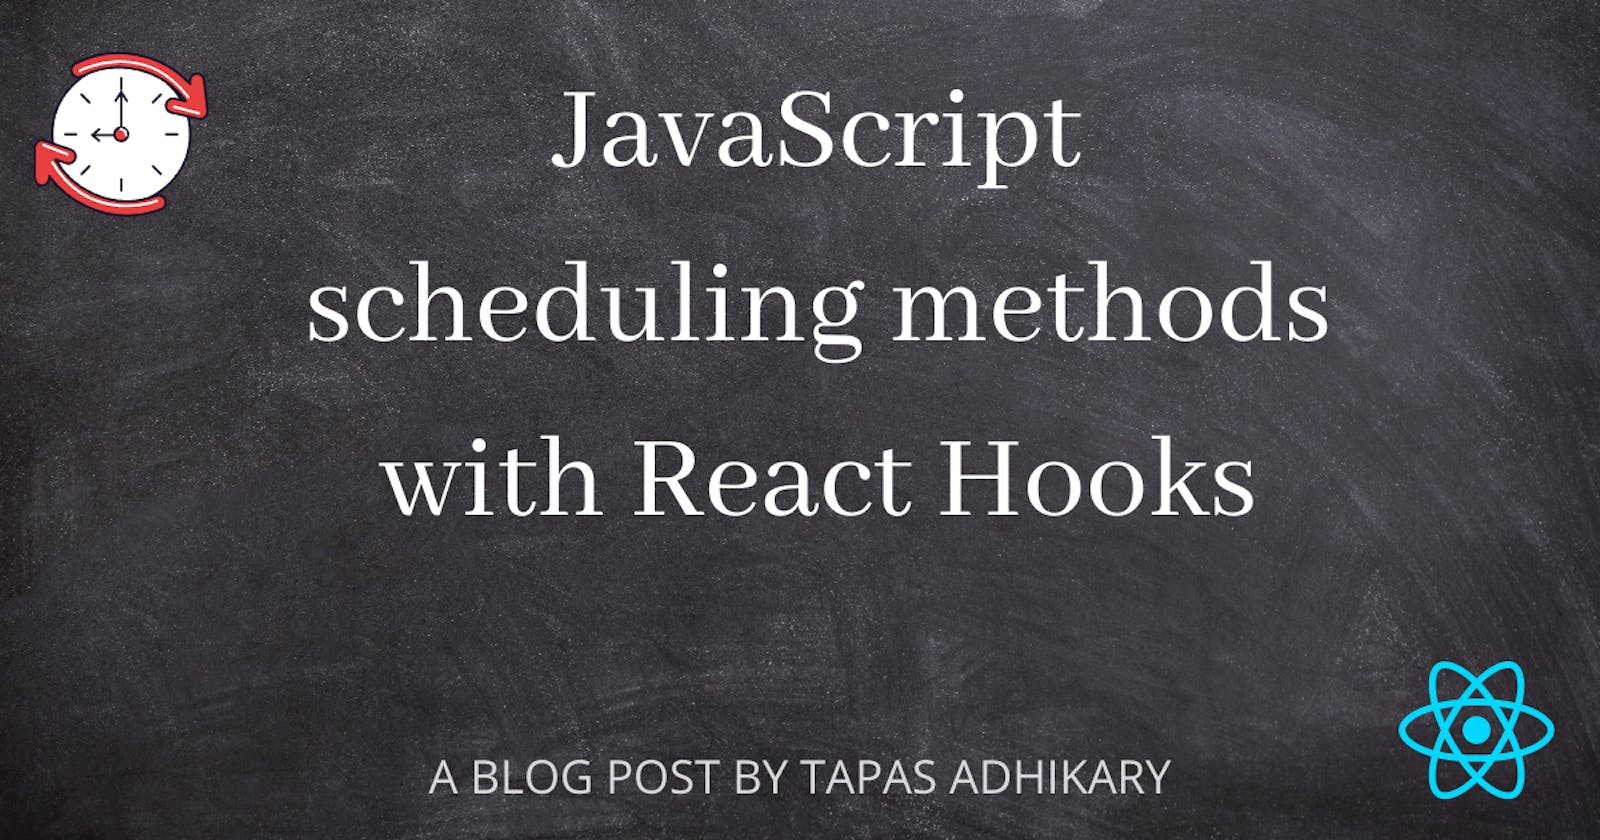 How to use JavaScript scheduling methods with React hooks